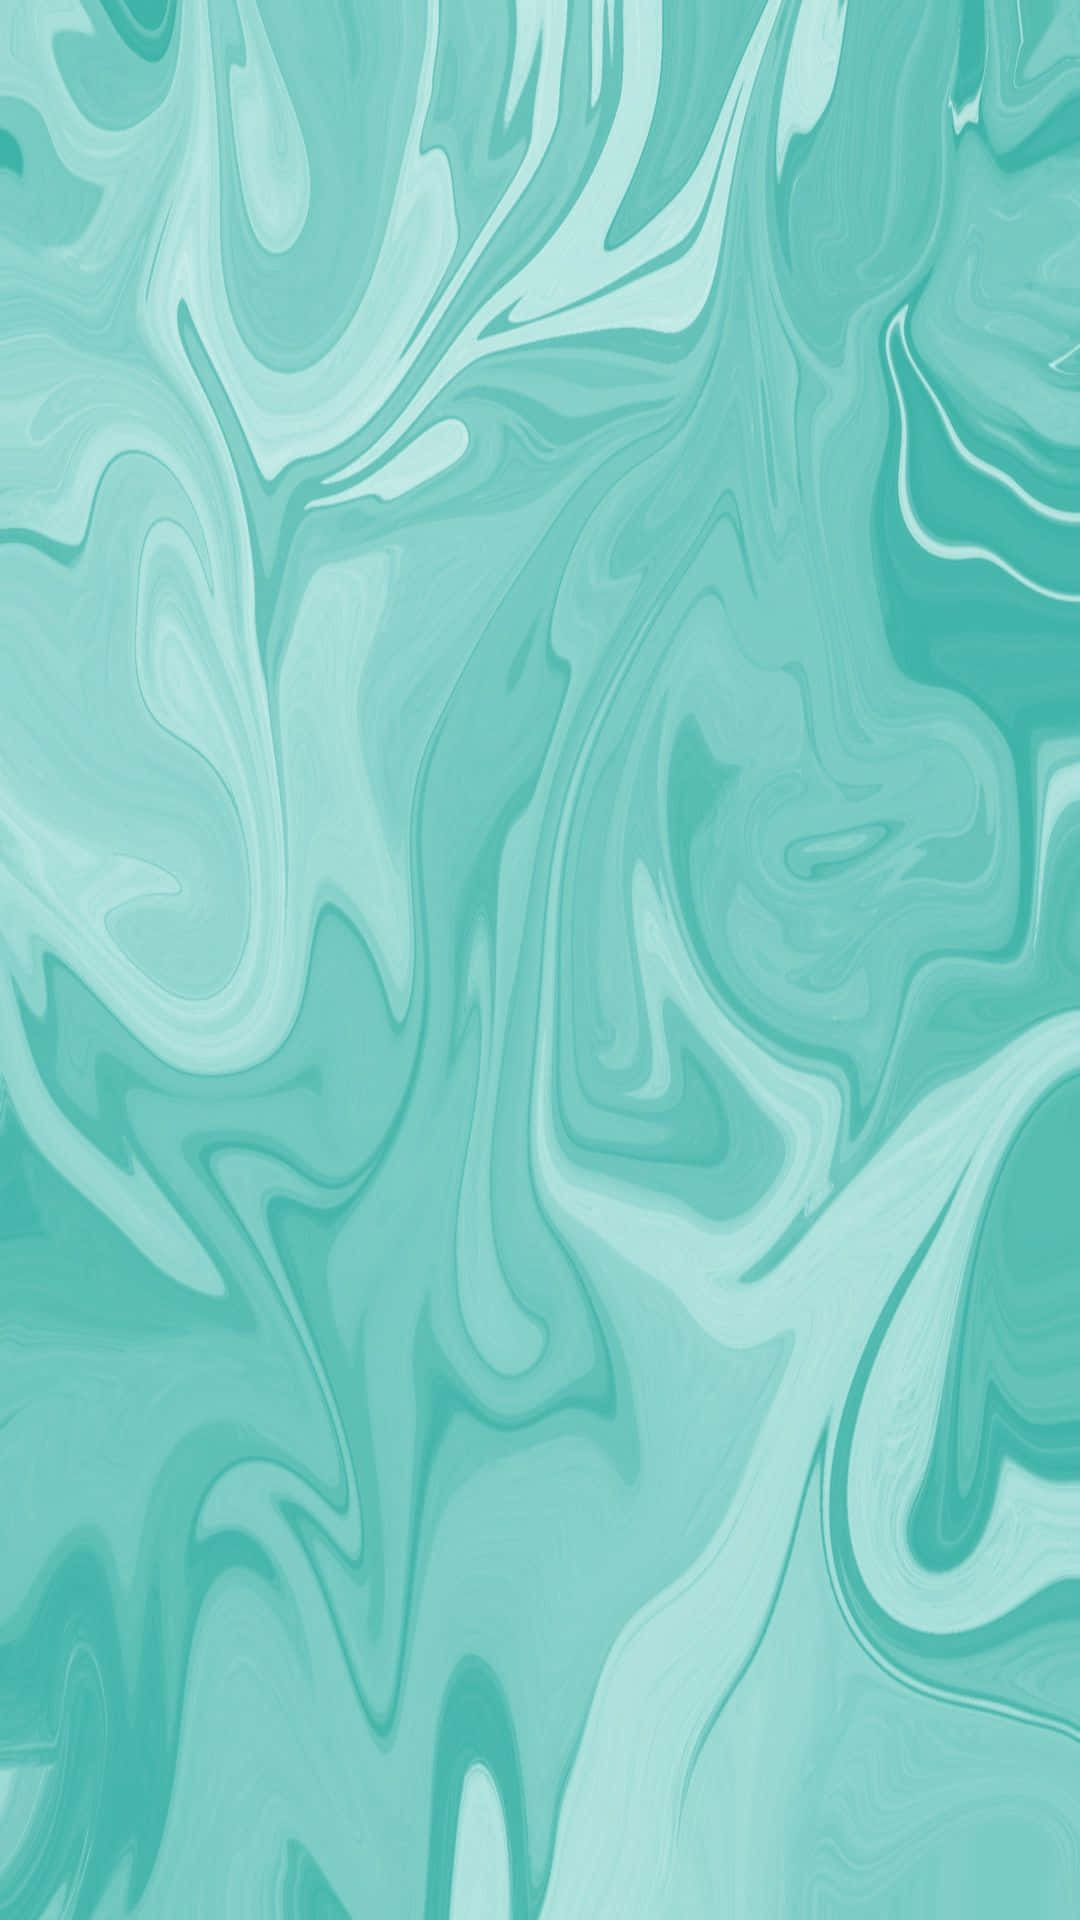 Teal Aesthetic Pictures 1080 X 1920 Qawjzydhc5oewy86 